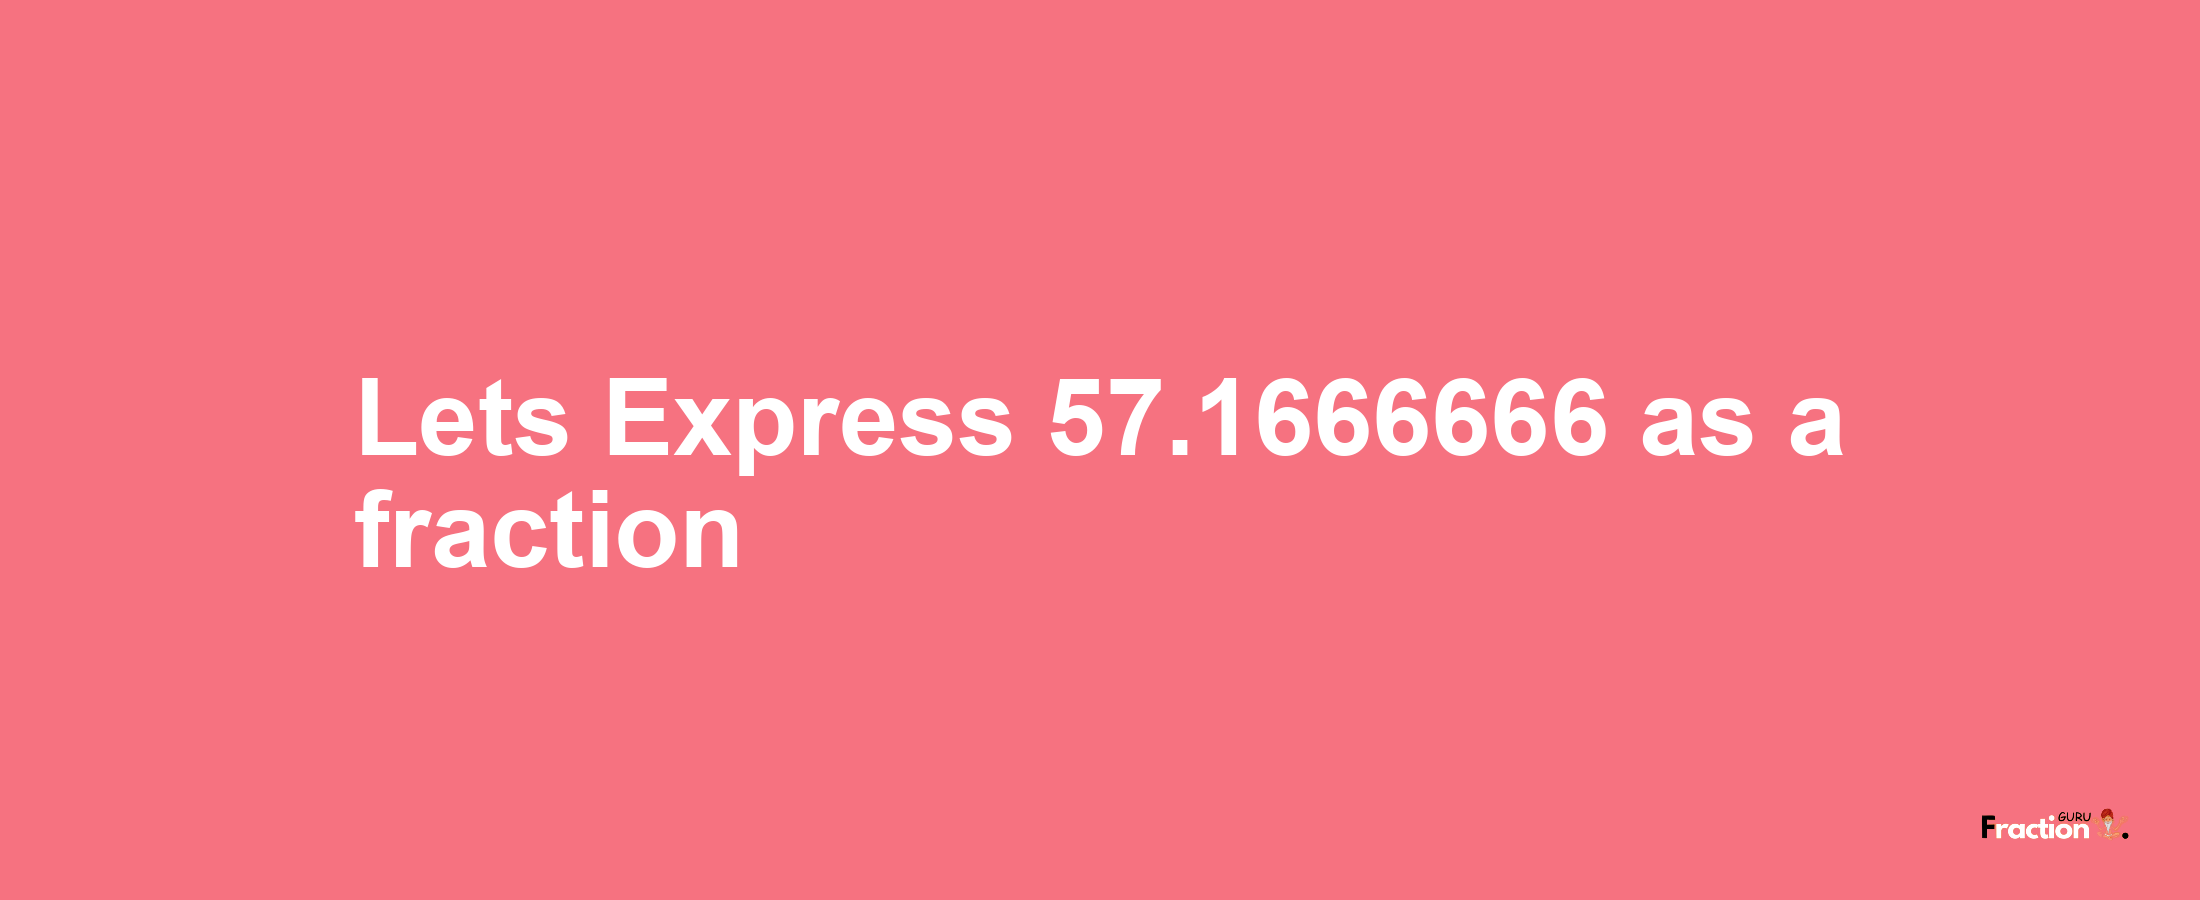 Lets Express 57.1666666 as afraction